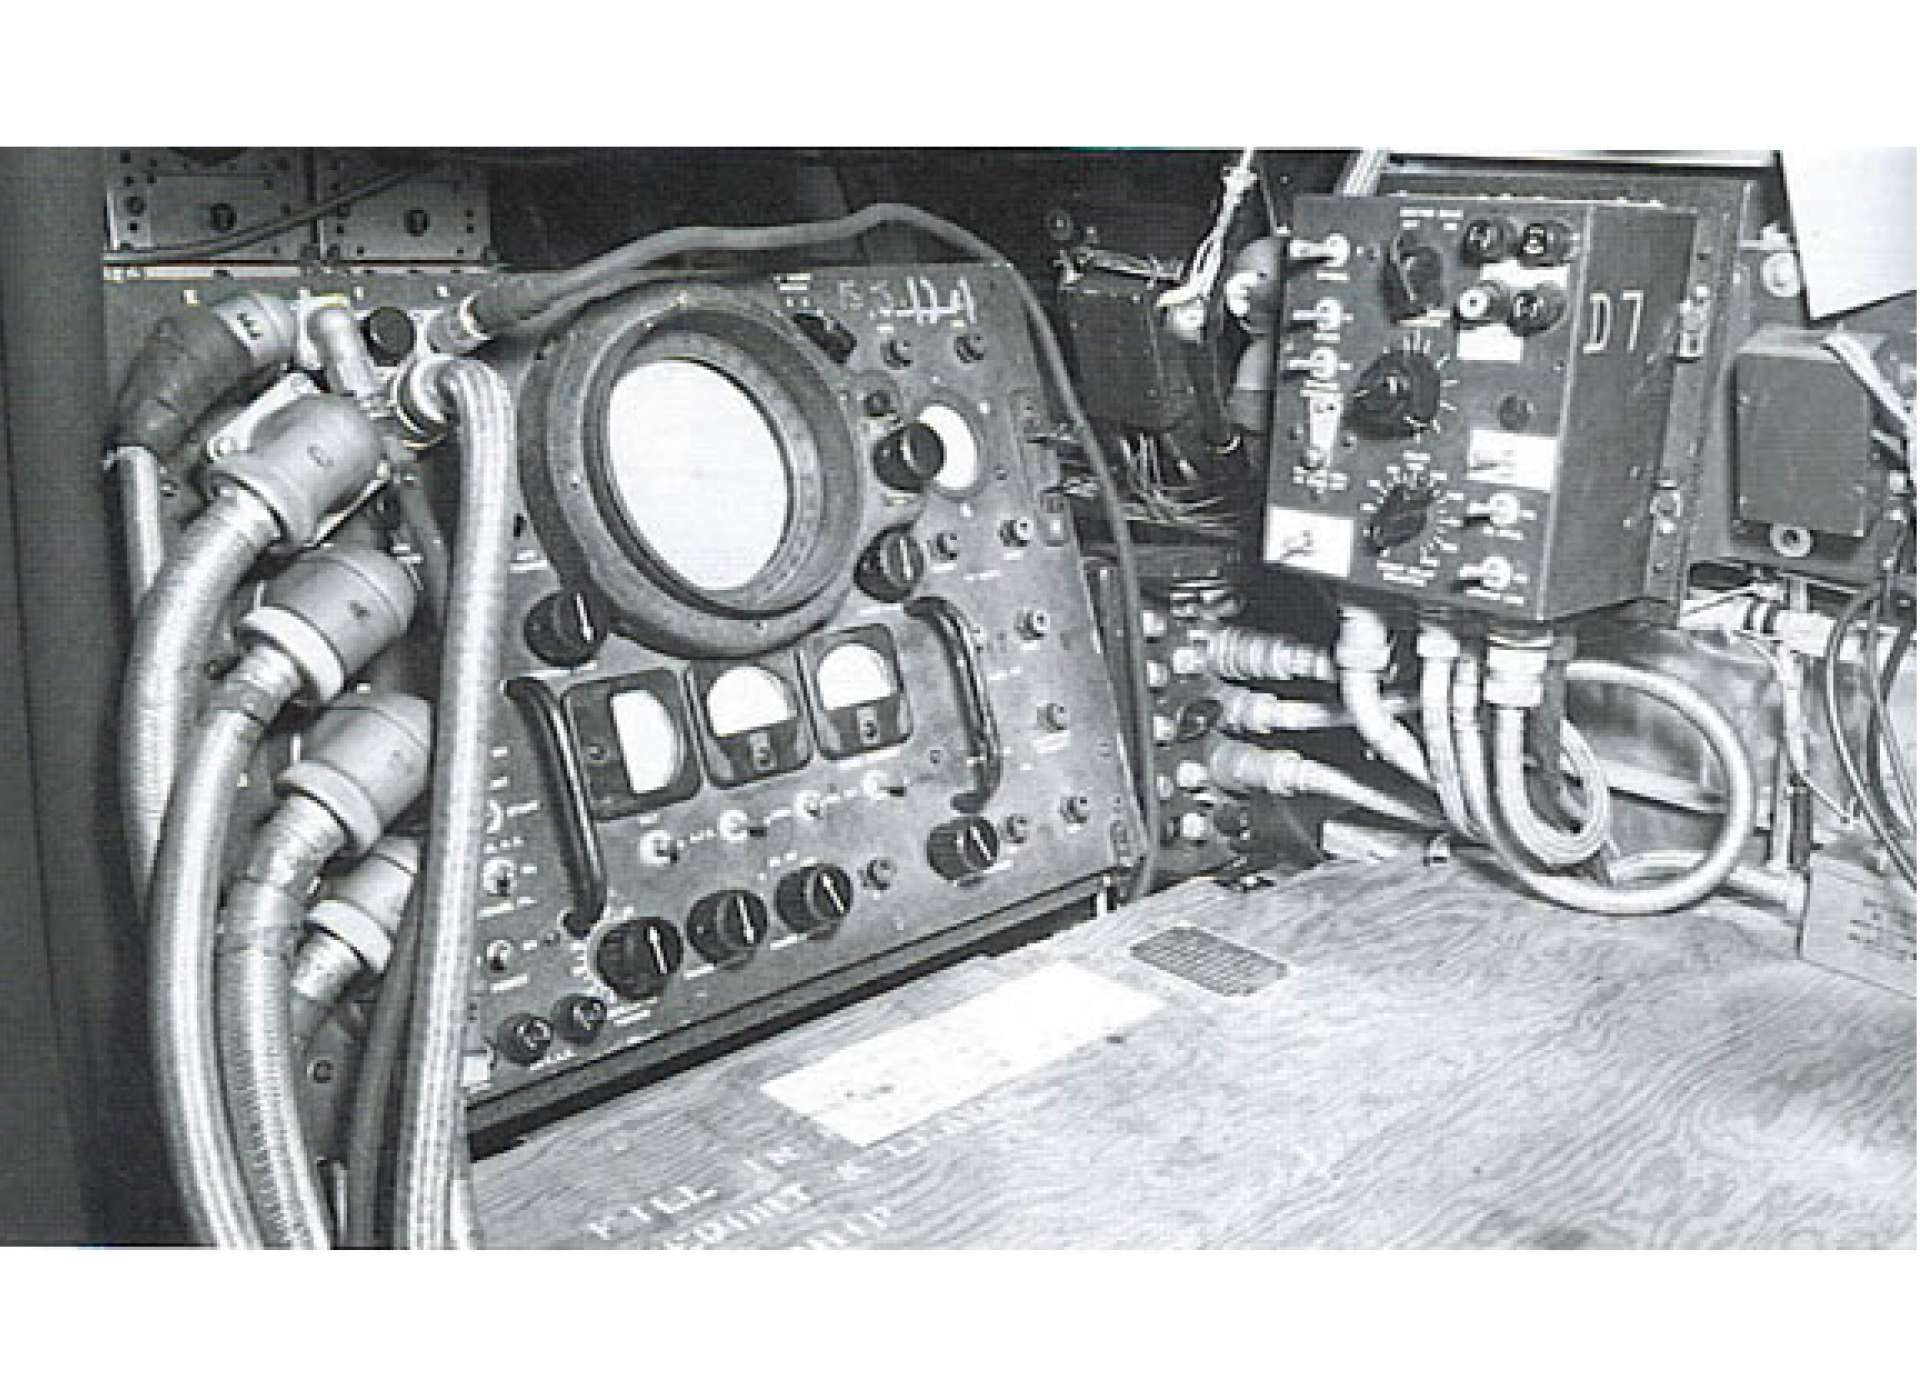 An image of the H2X operator station in an airplane. From the 482 Bomb Group, USAAF Archives.